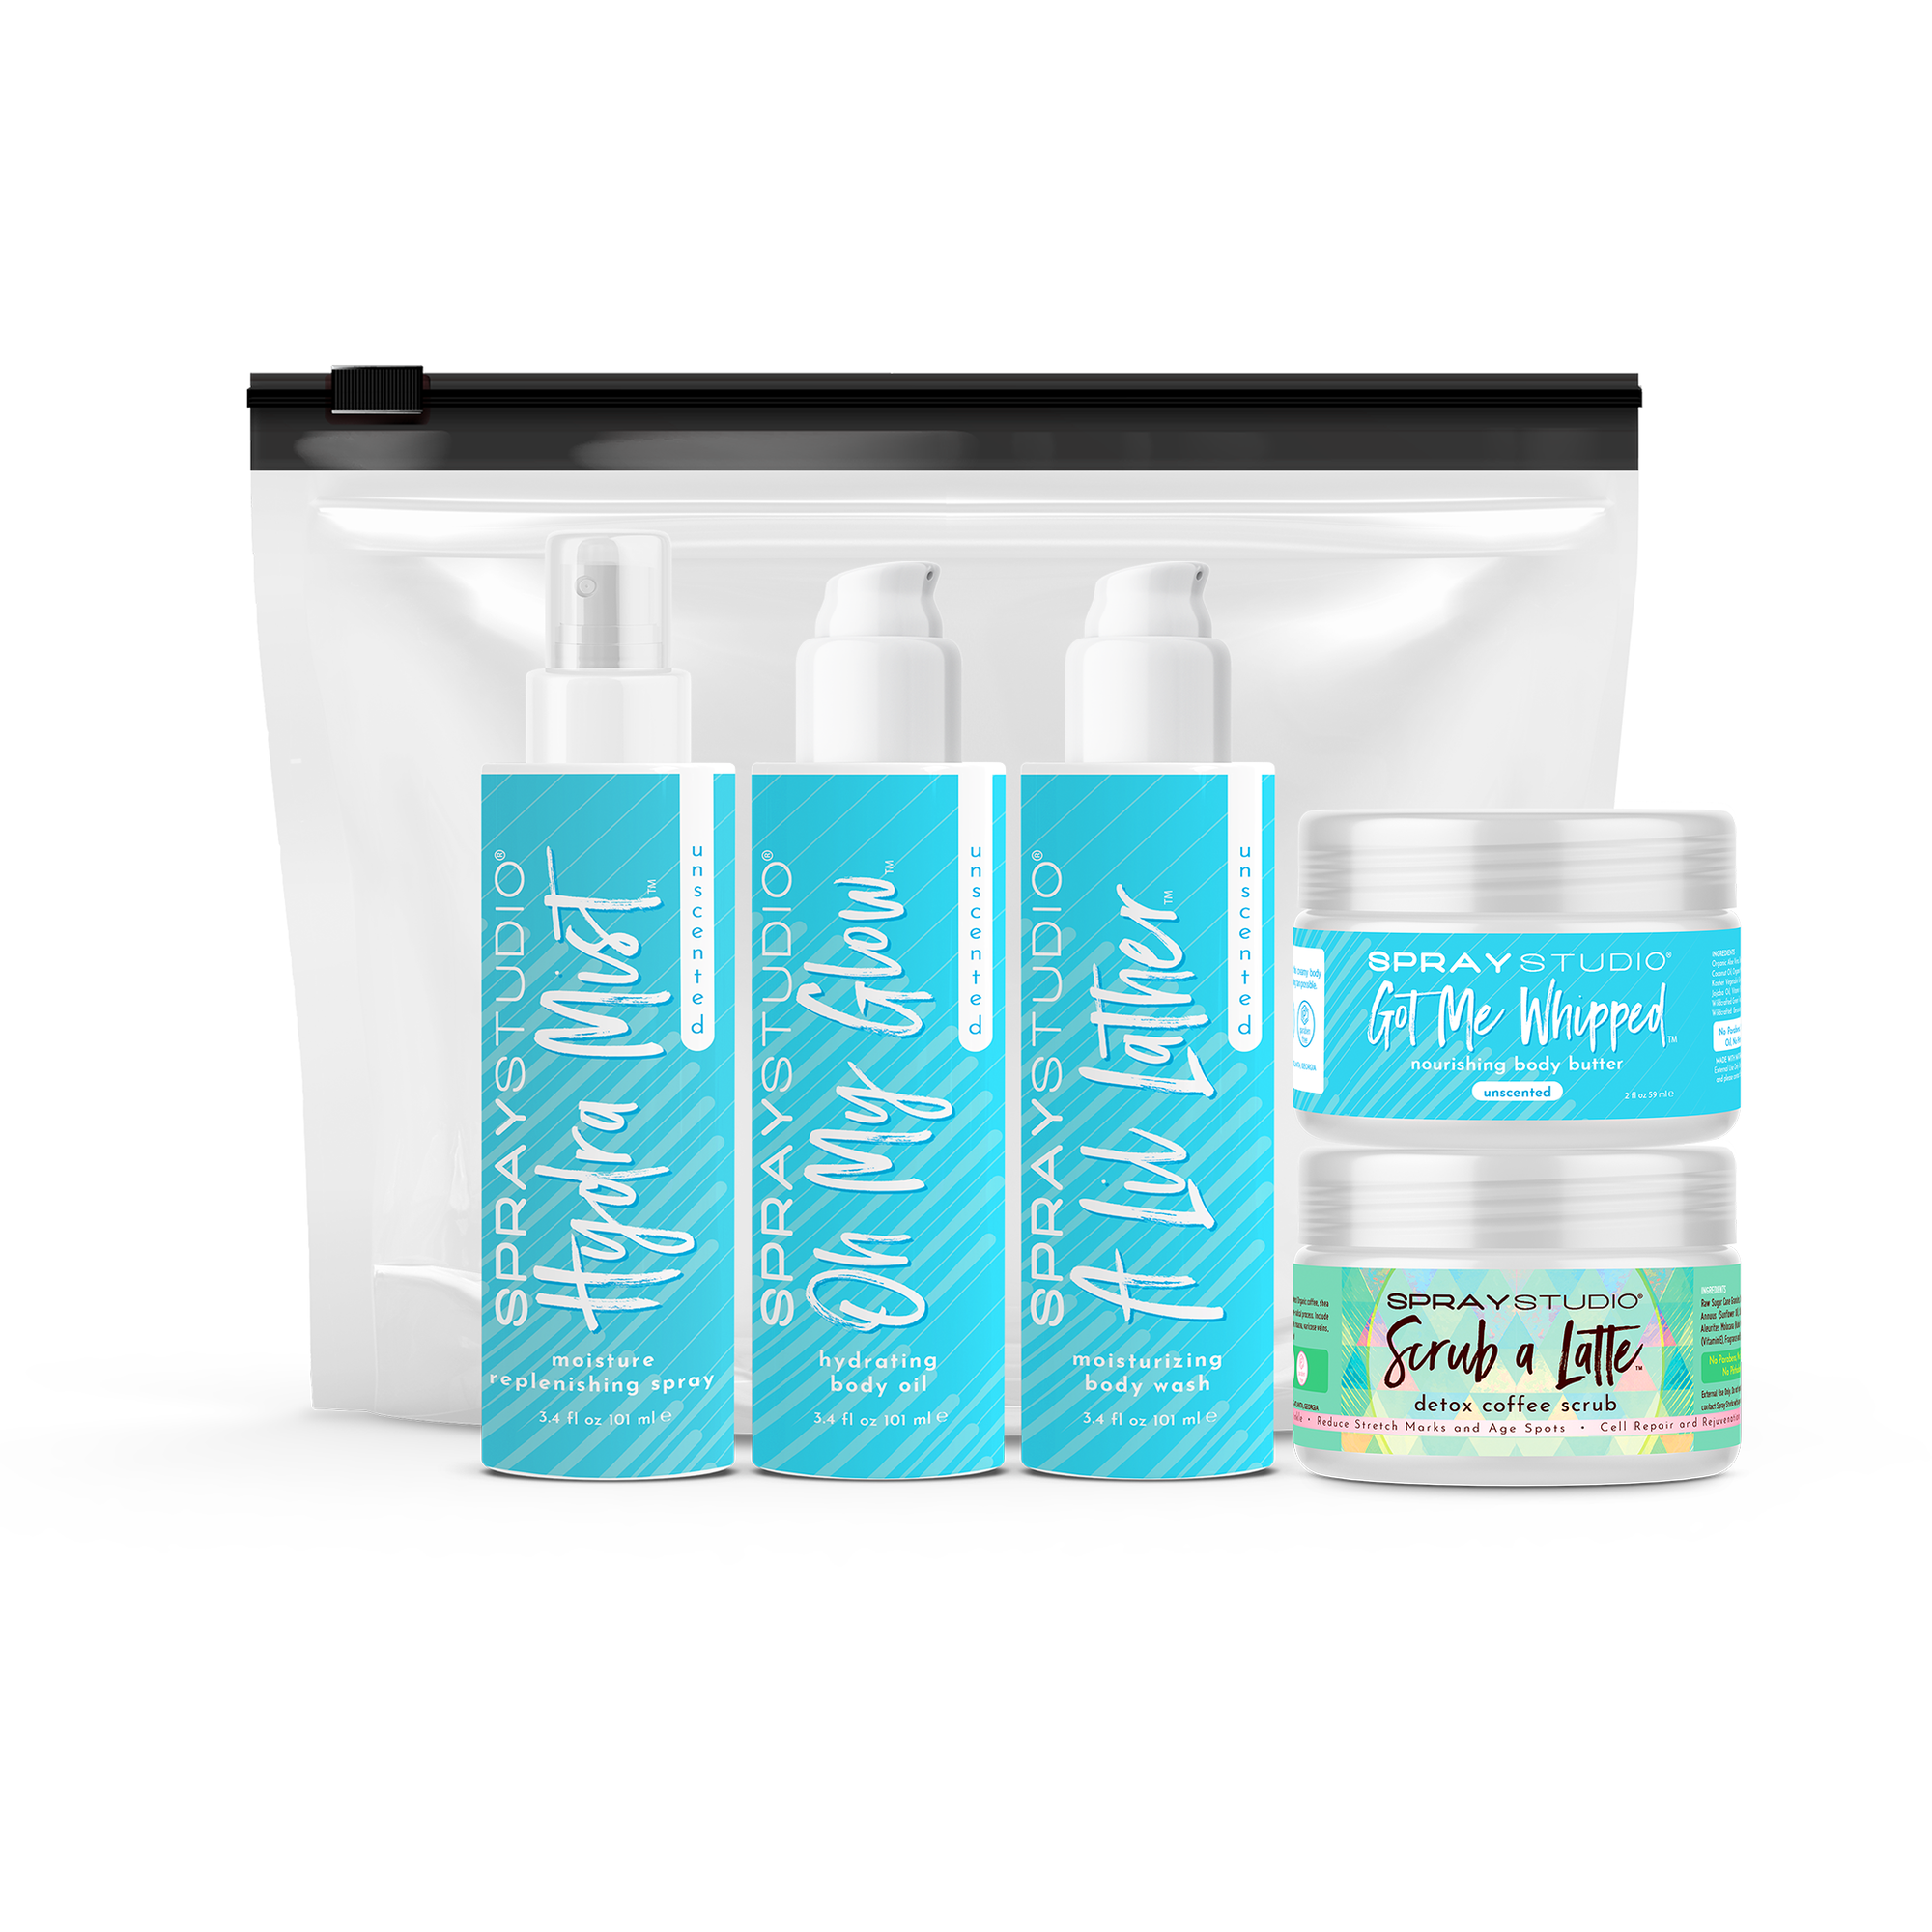 BODY CARE TRAVEL KIT - SPRAY STUDIO® | sunless tanning and body care